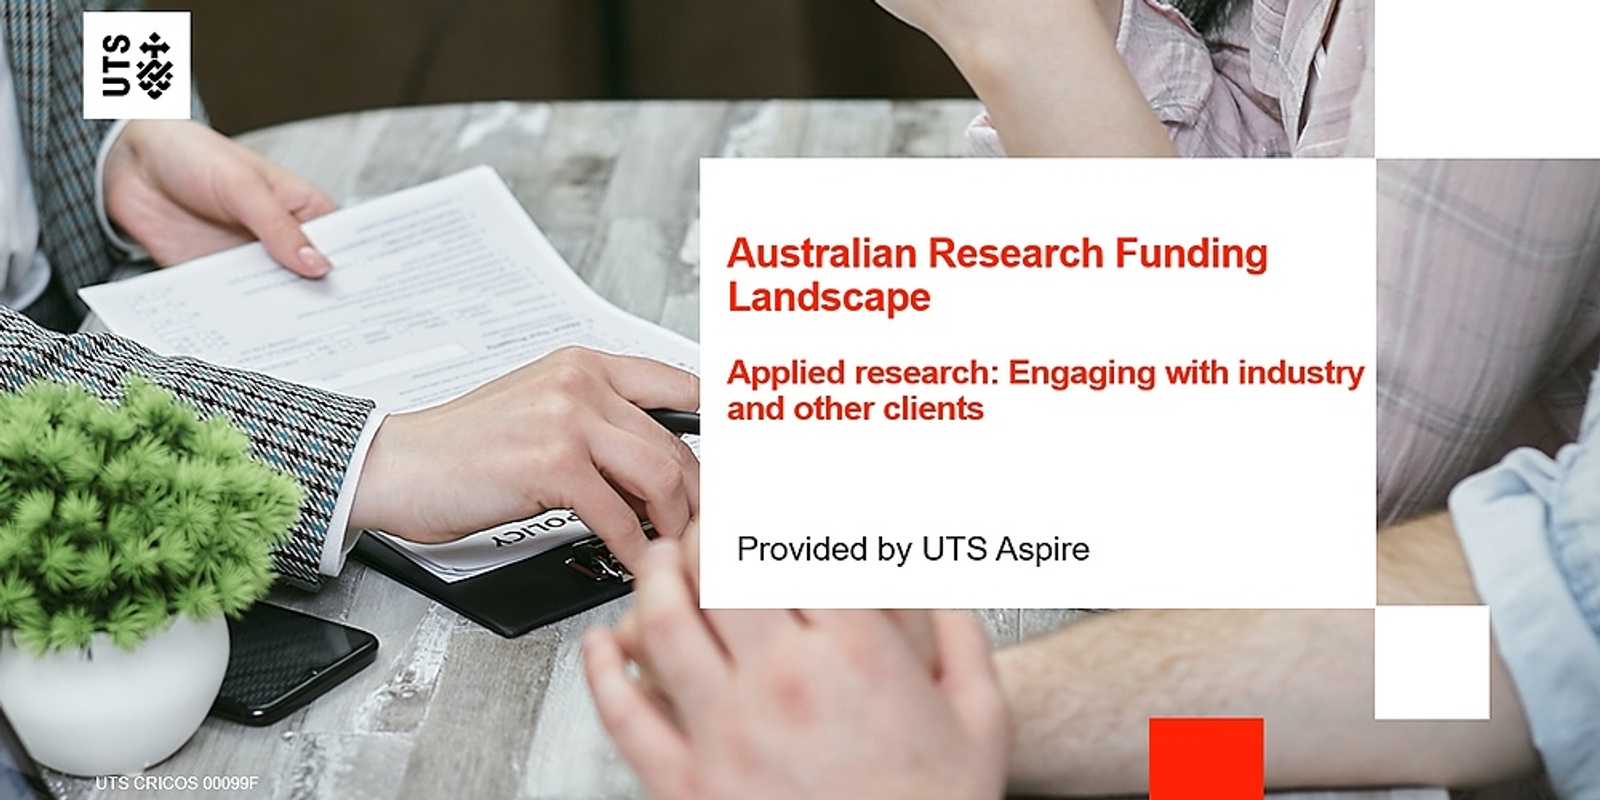 ARFL - Applied research: Engaging with industry and other clients